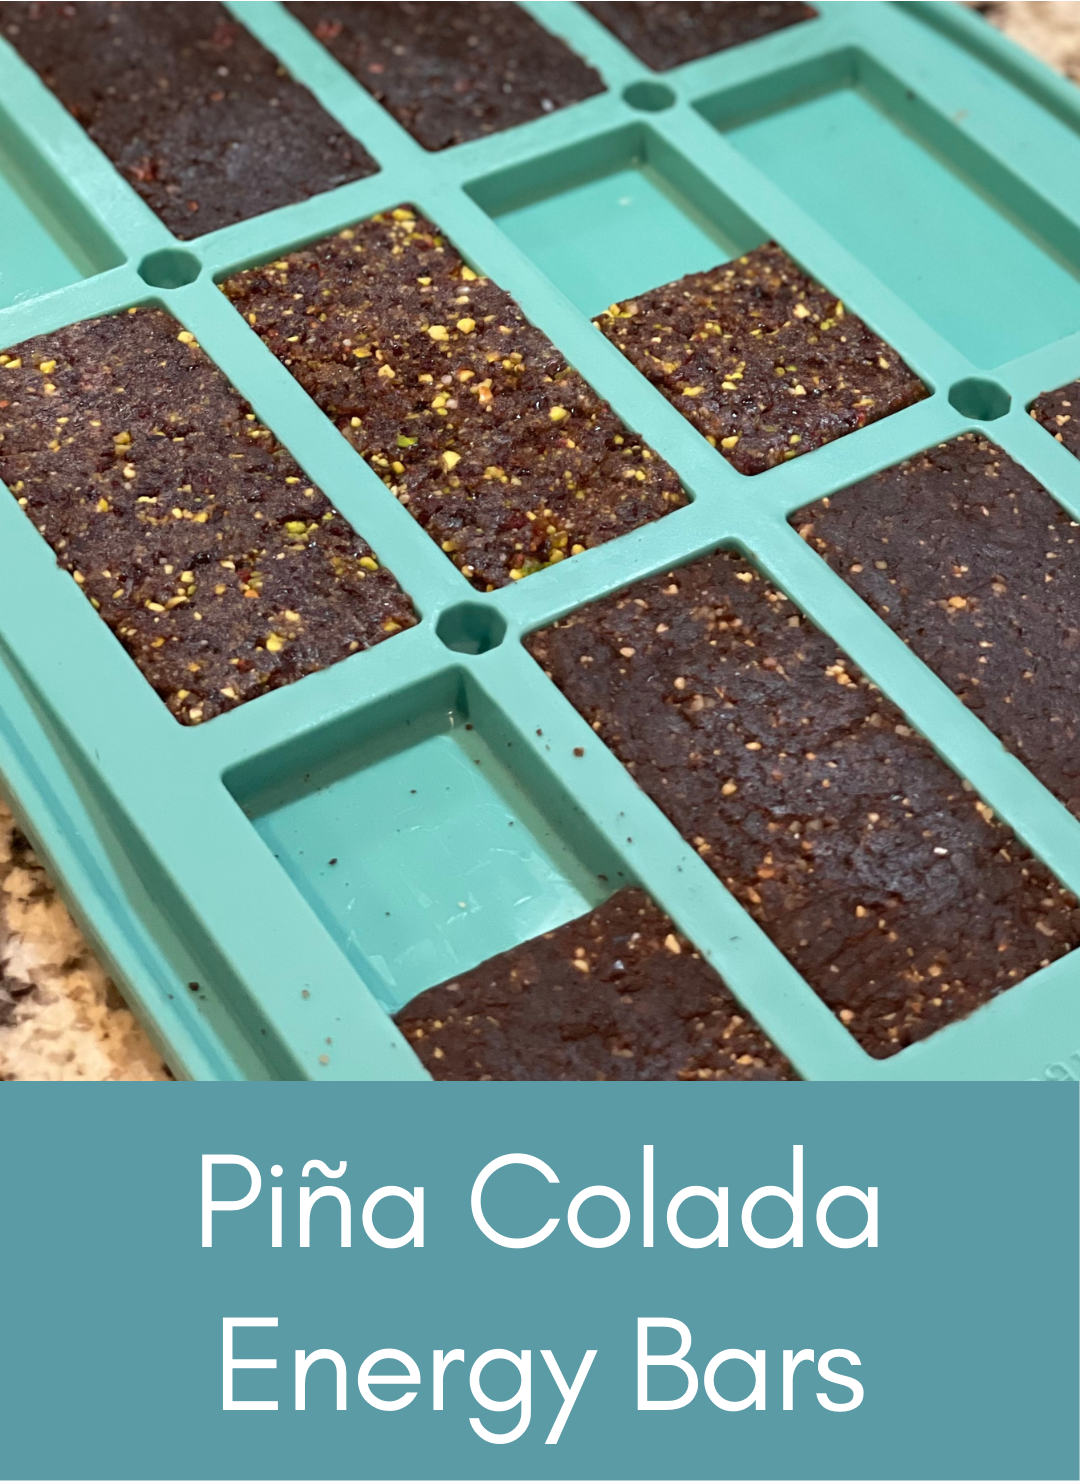 piña colada whole food plant based energy bars Picture with link to recipe